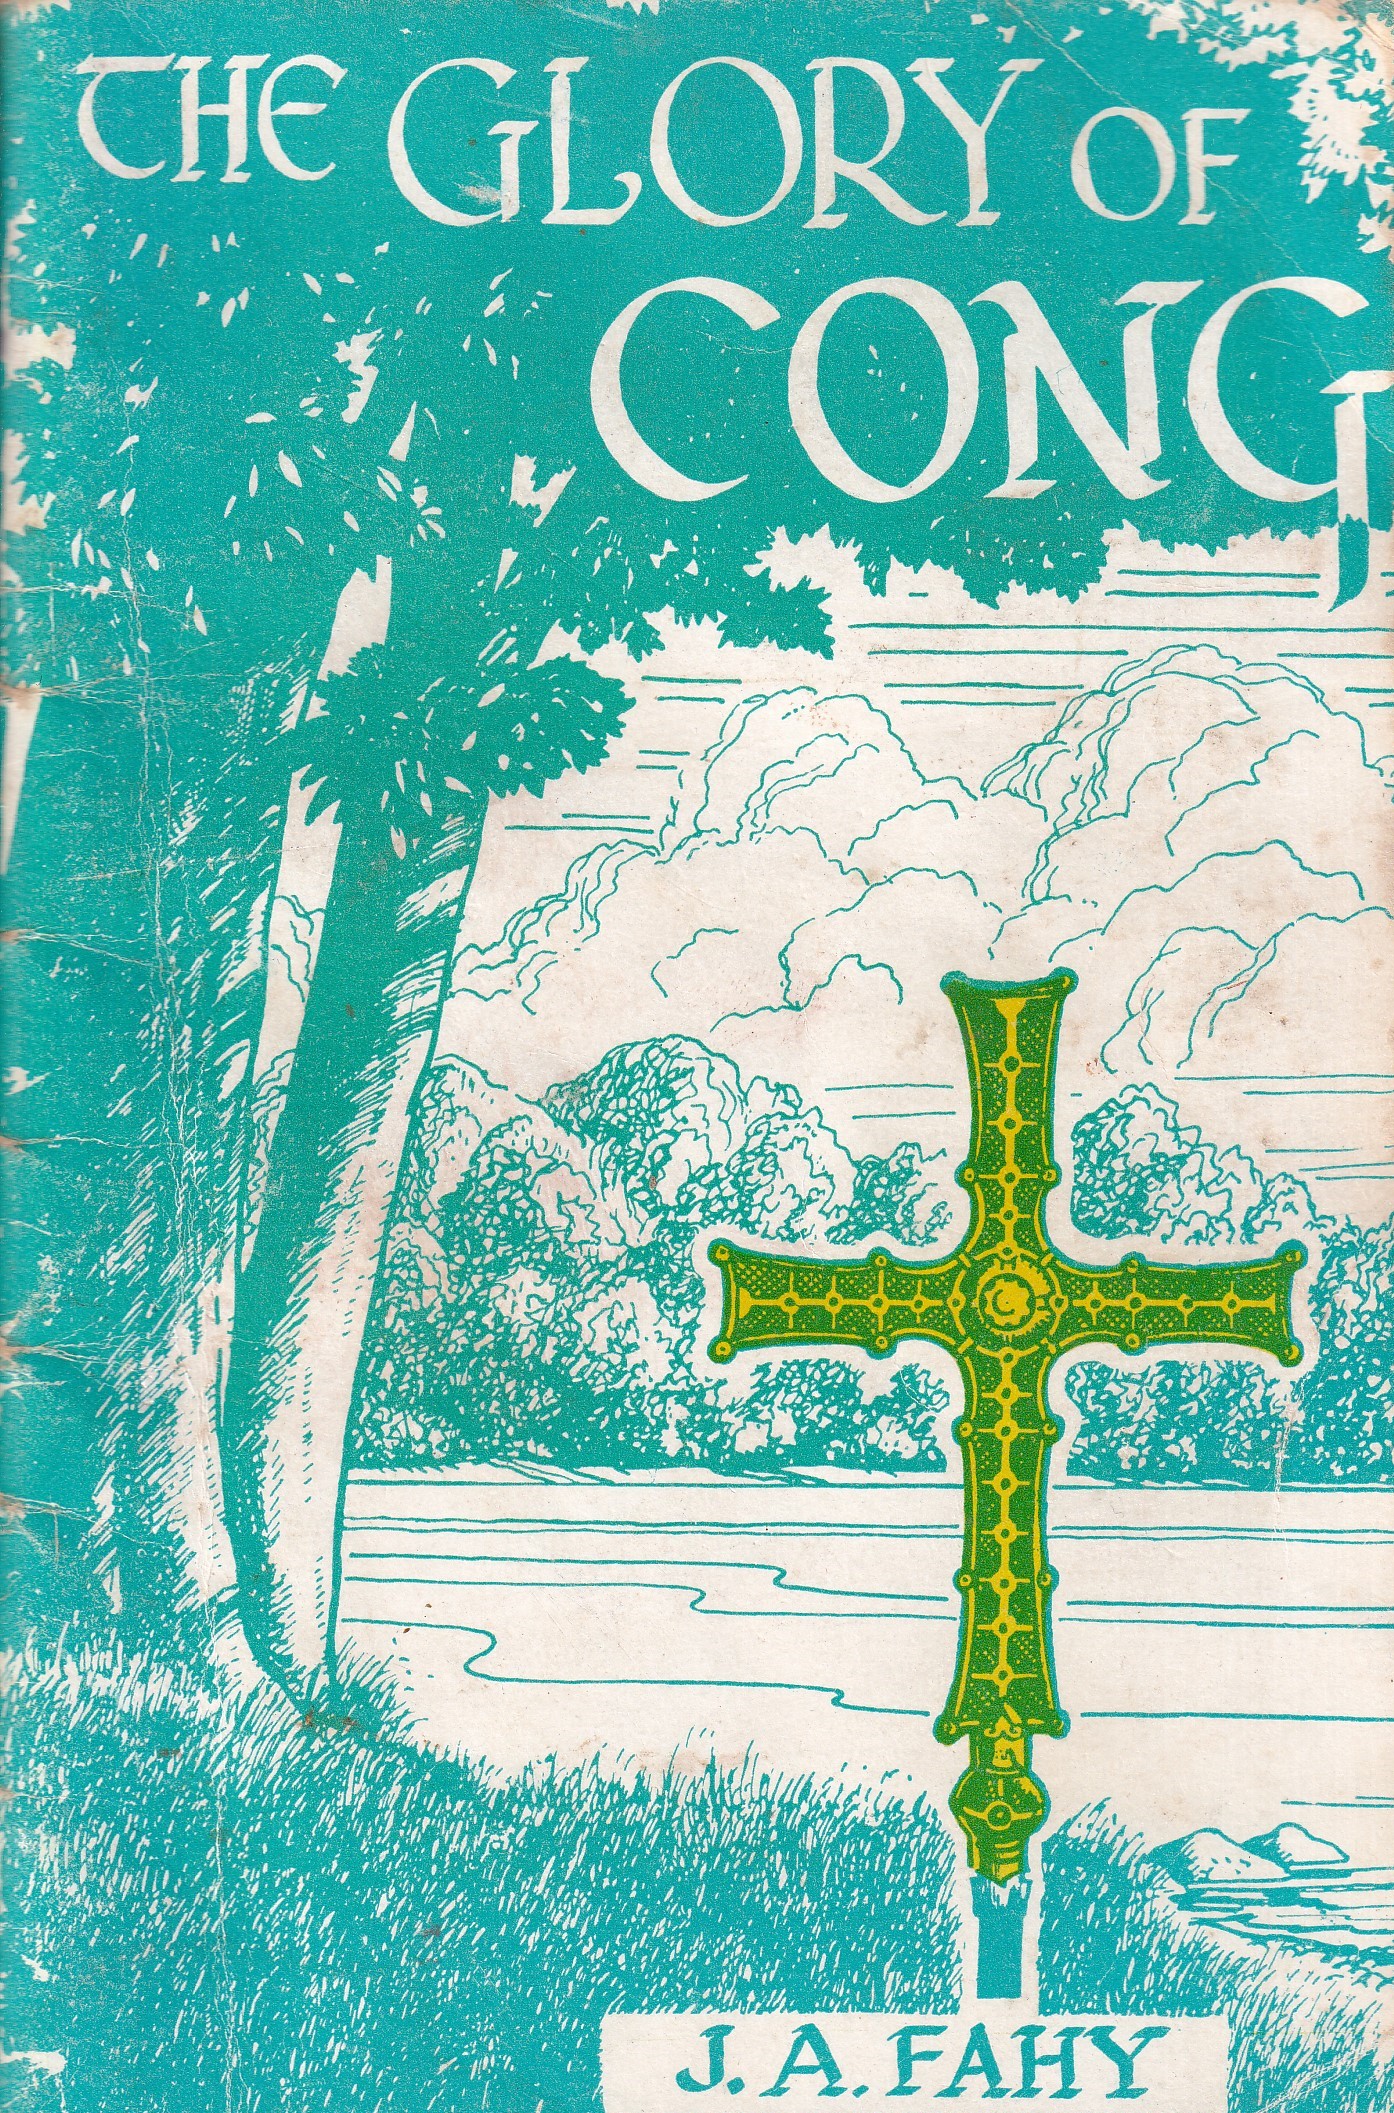 The Glory of Cong by J.A. Fahy